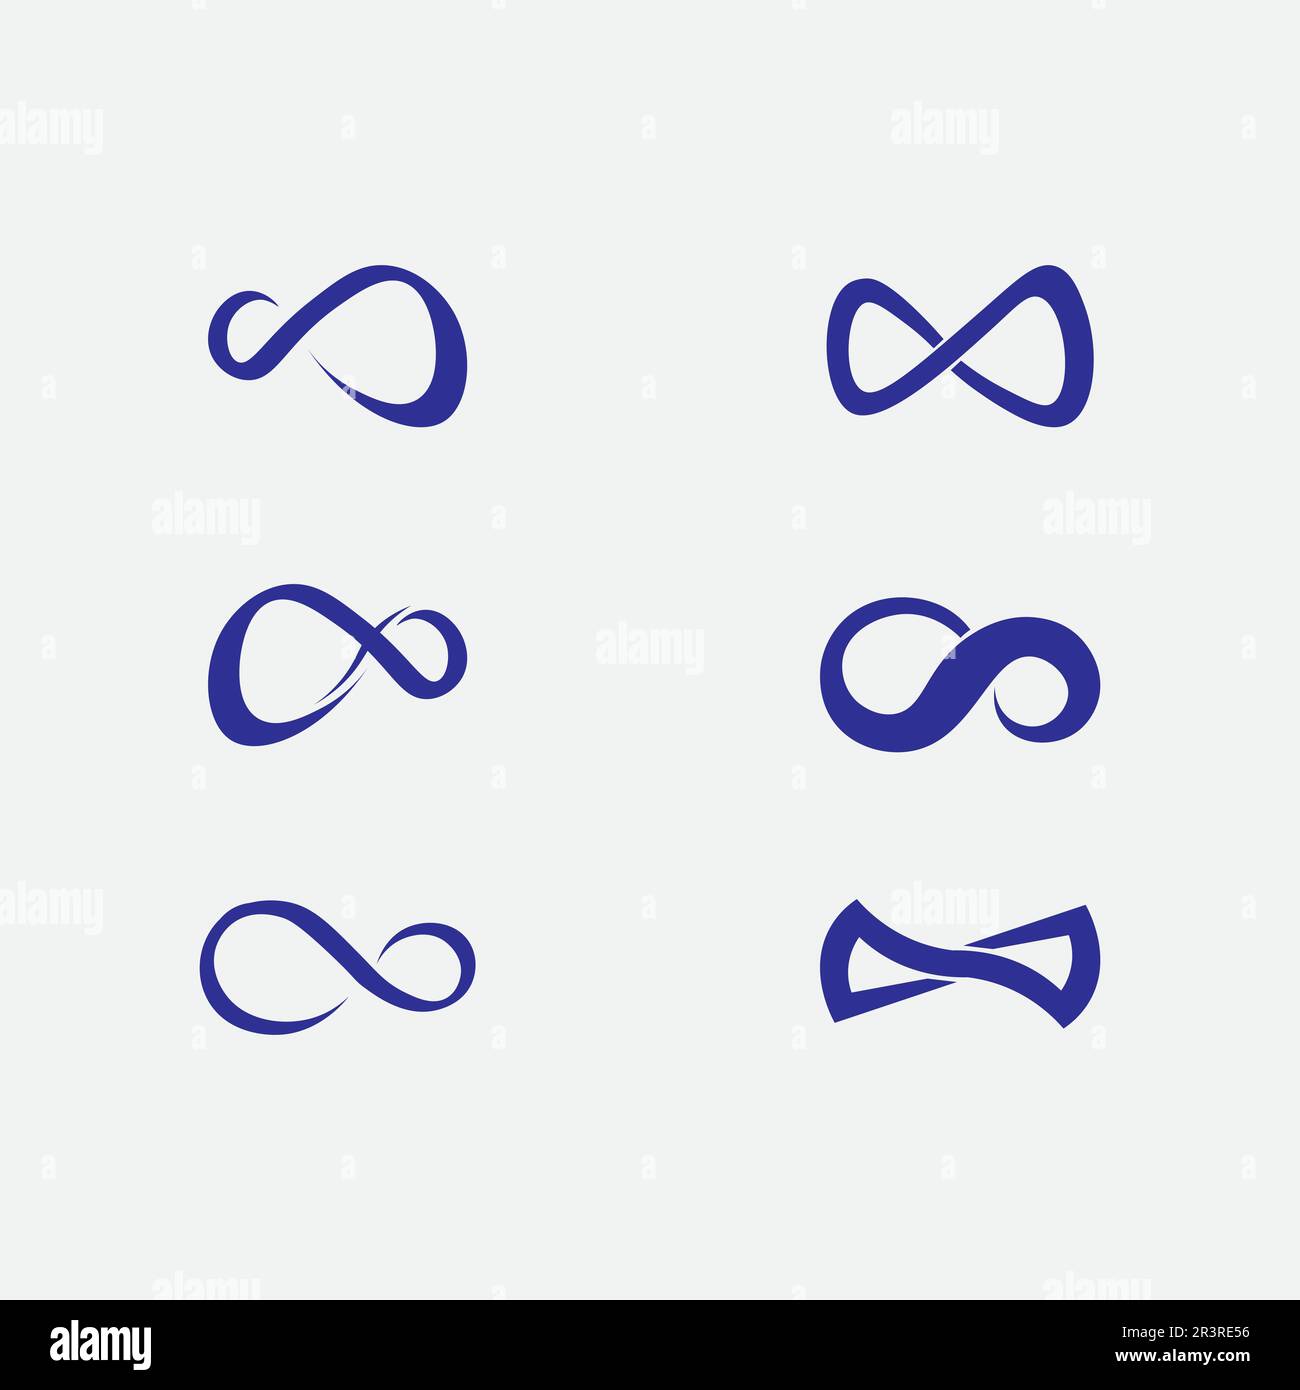 infinity design logo and 8 icon, vector, sign, creative logo for business and corporate infinity symbol Stock Vector